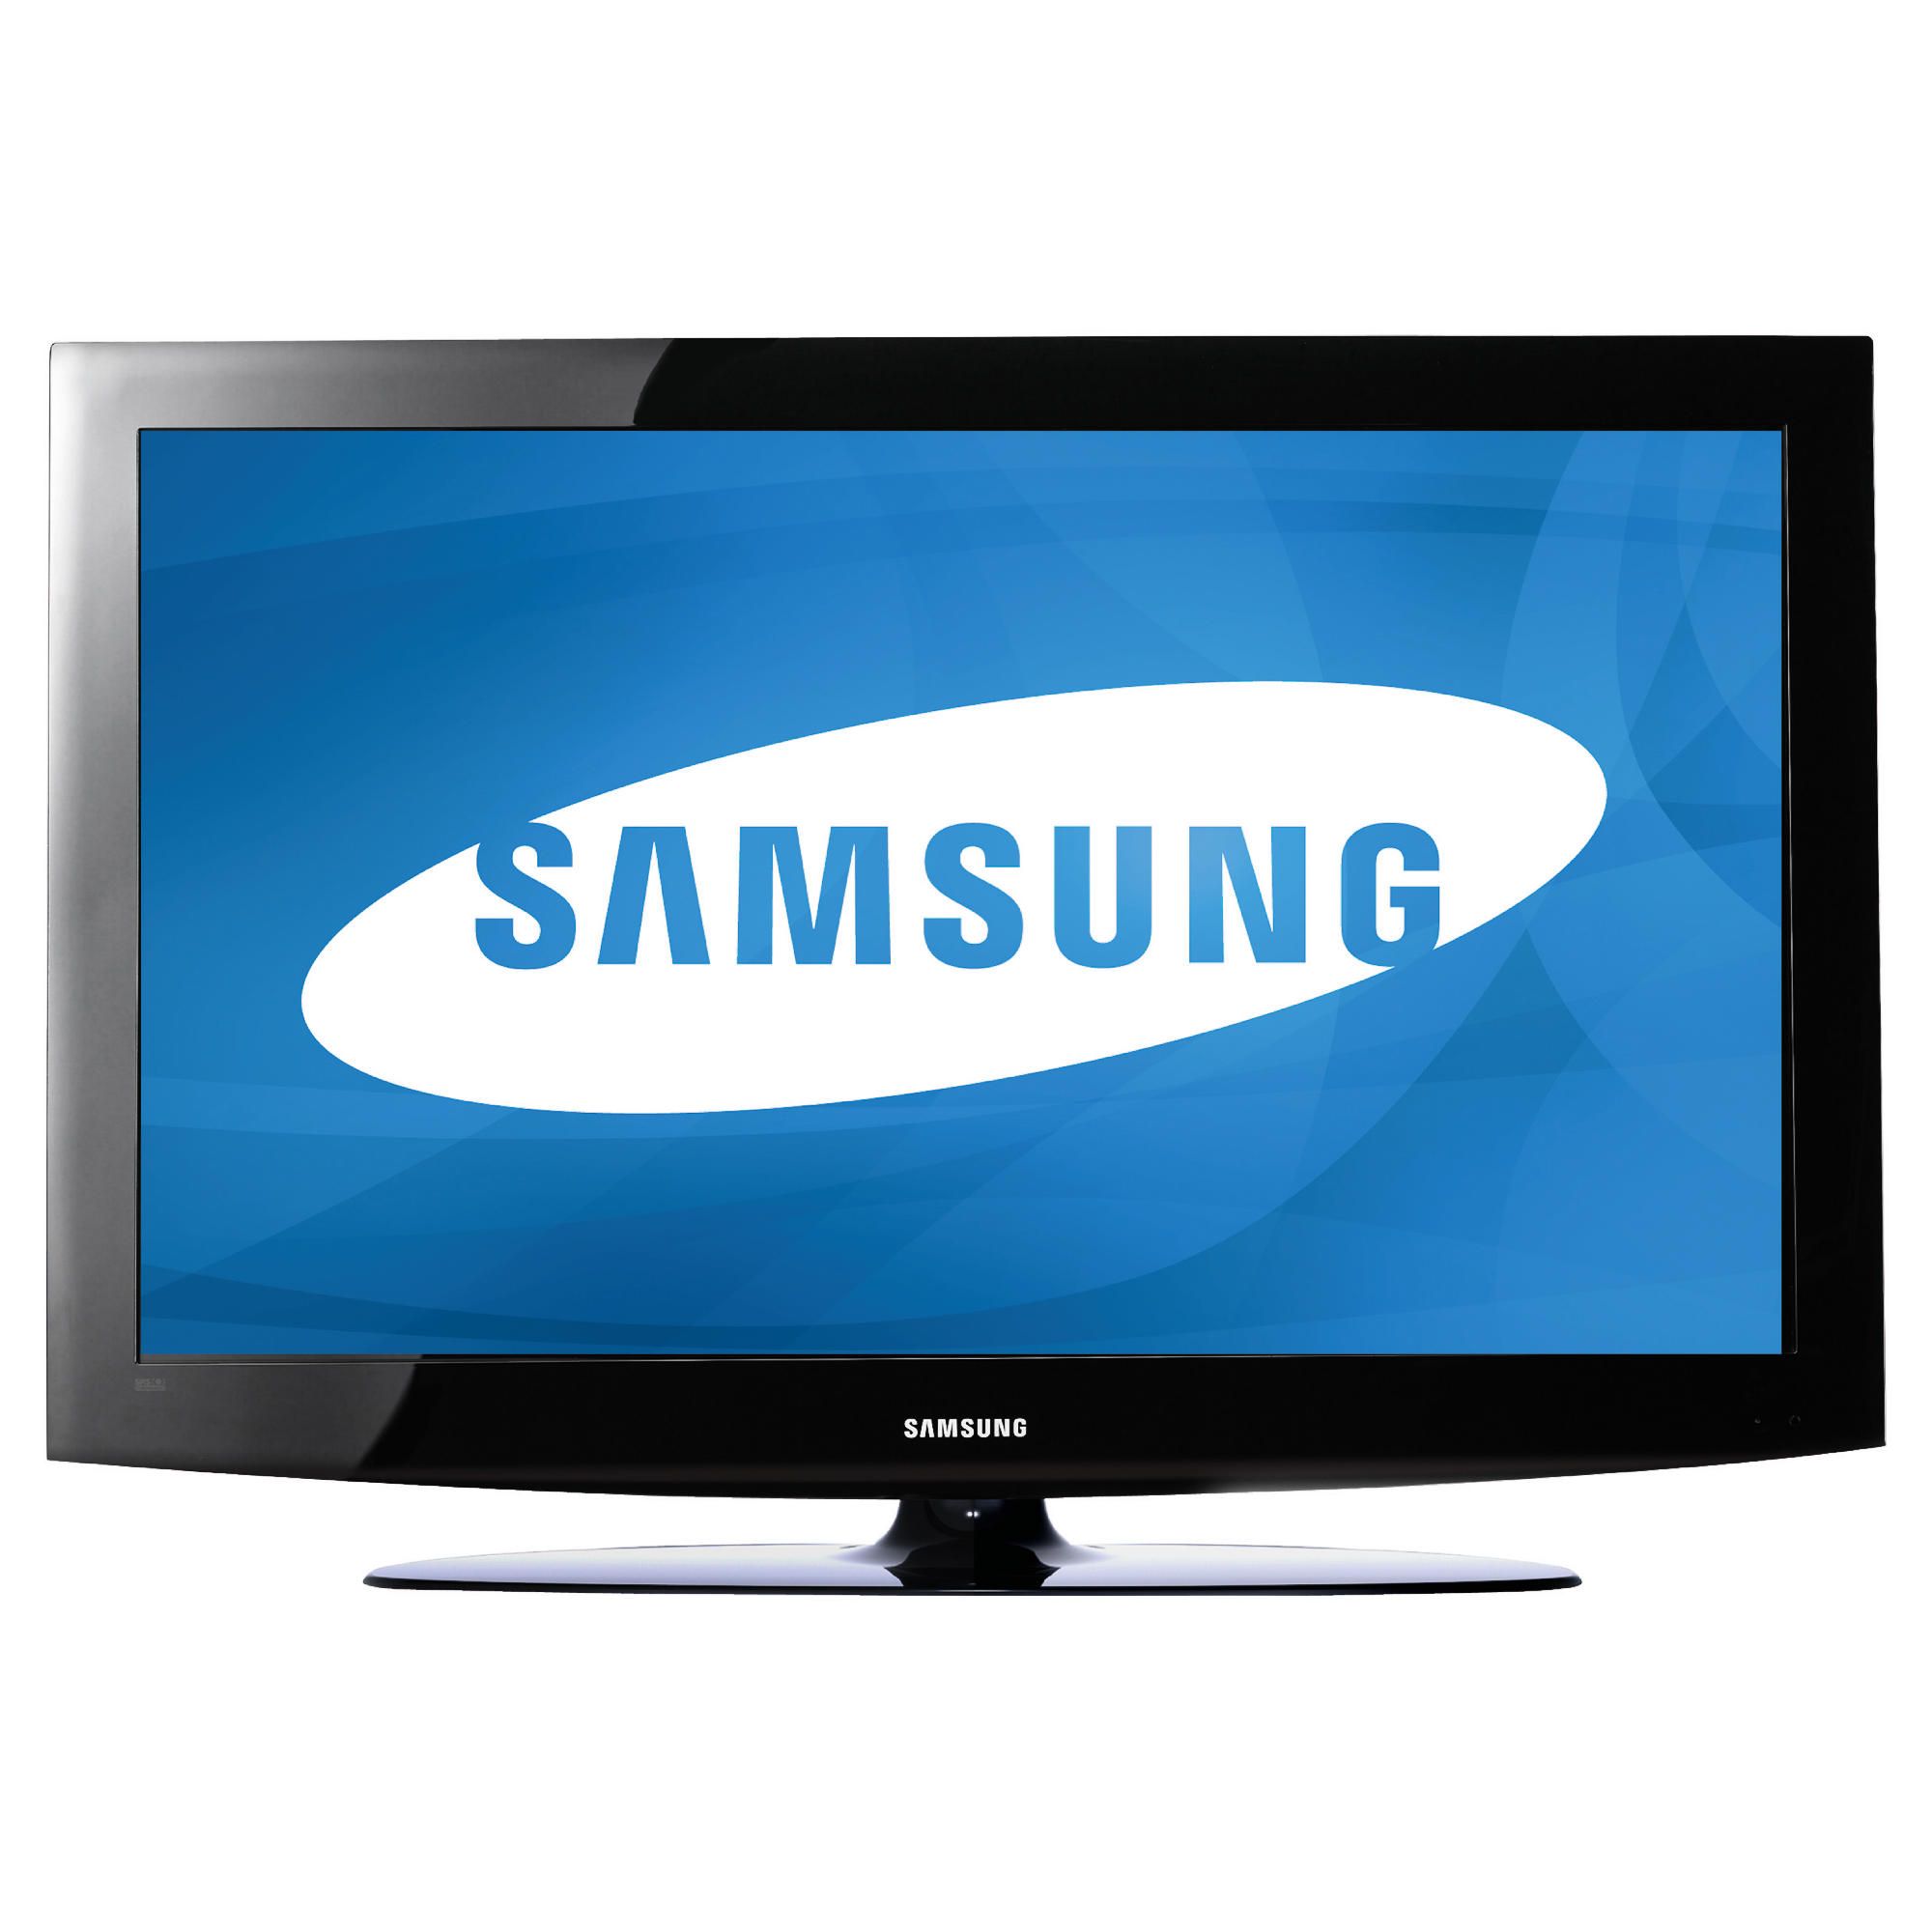 Samsung LE40D503 40 inch Widescreen Full HD 1080p LCD TV with Freeview